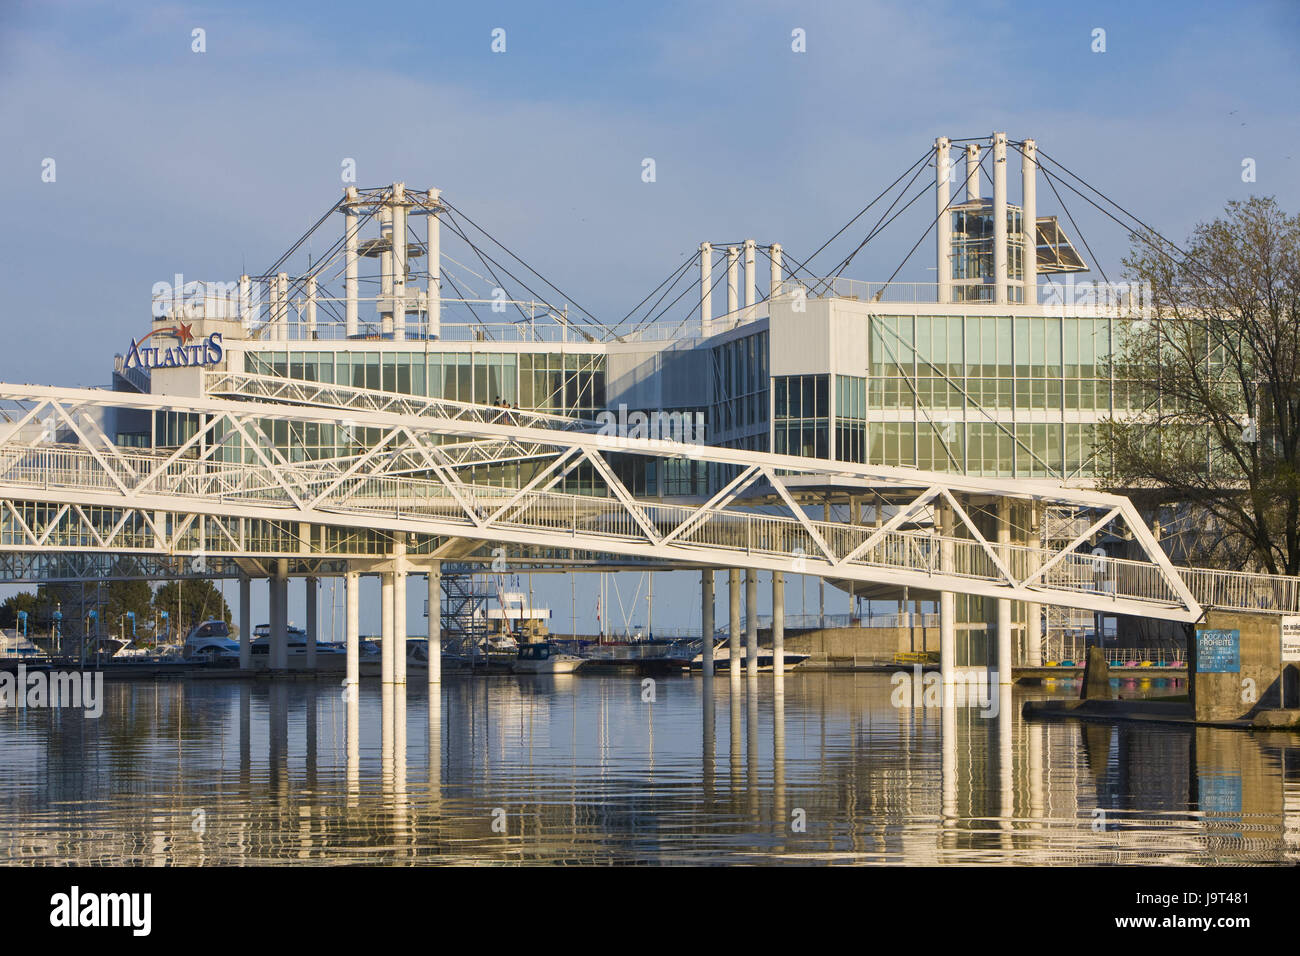 Canada,Ontario,Toronto,Atlantis event Centre,Ontario Place,North America,town,lake,Ontario lake,water,shore,town view,building,structure,architecture,leisure time,destination,amusement,event centre,entertainment,leisure time centre,place of interest, Stock Photo